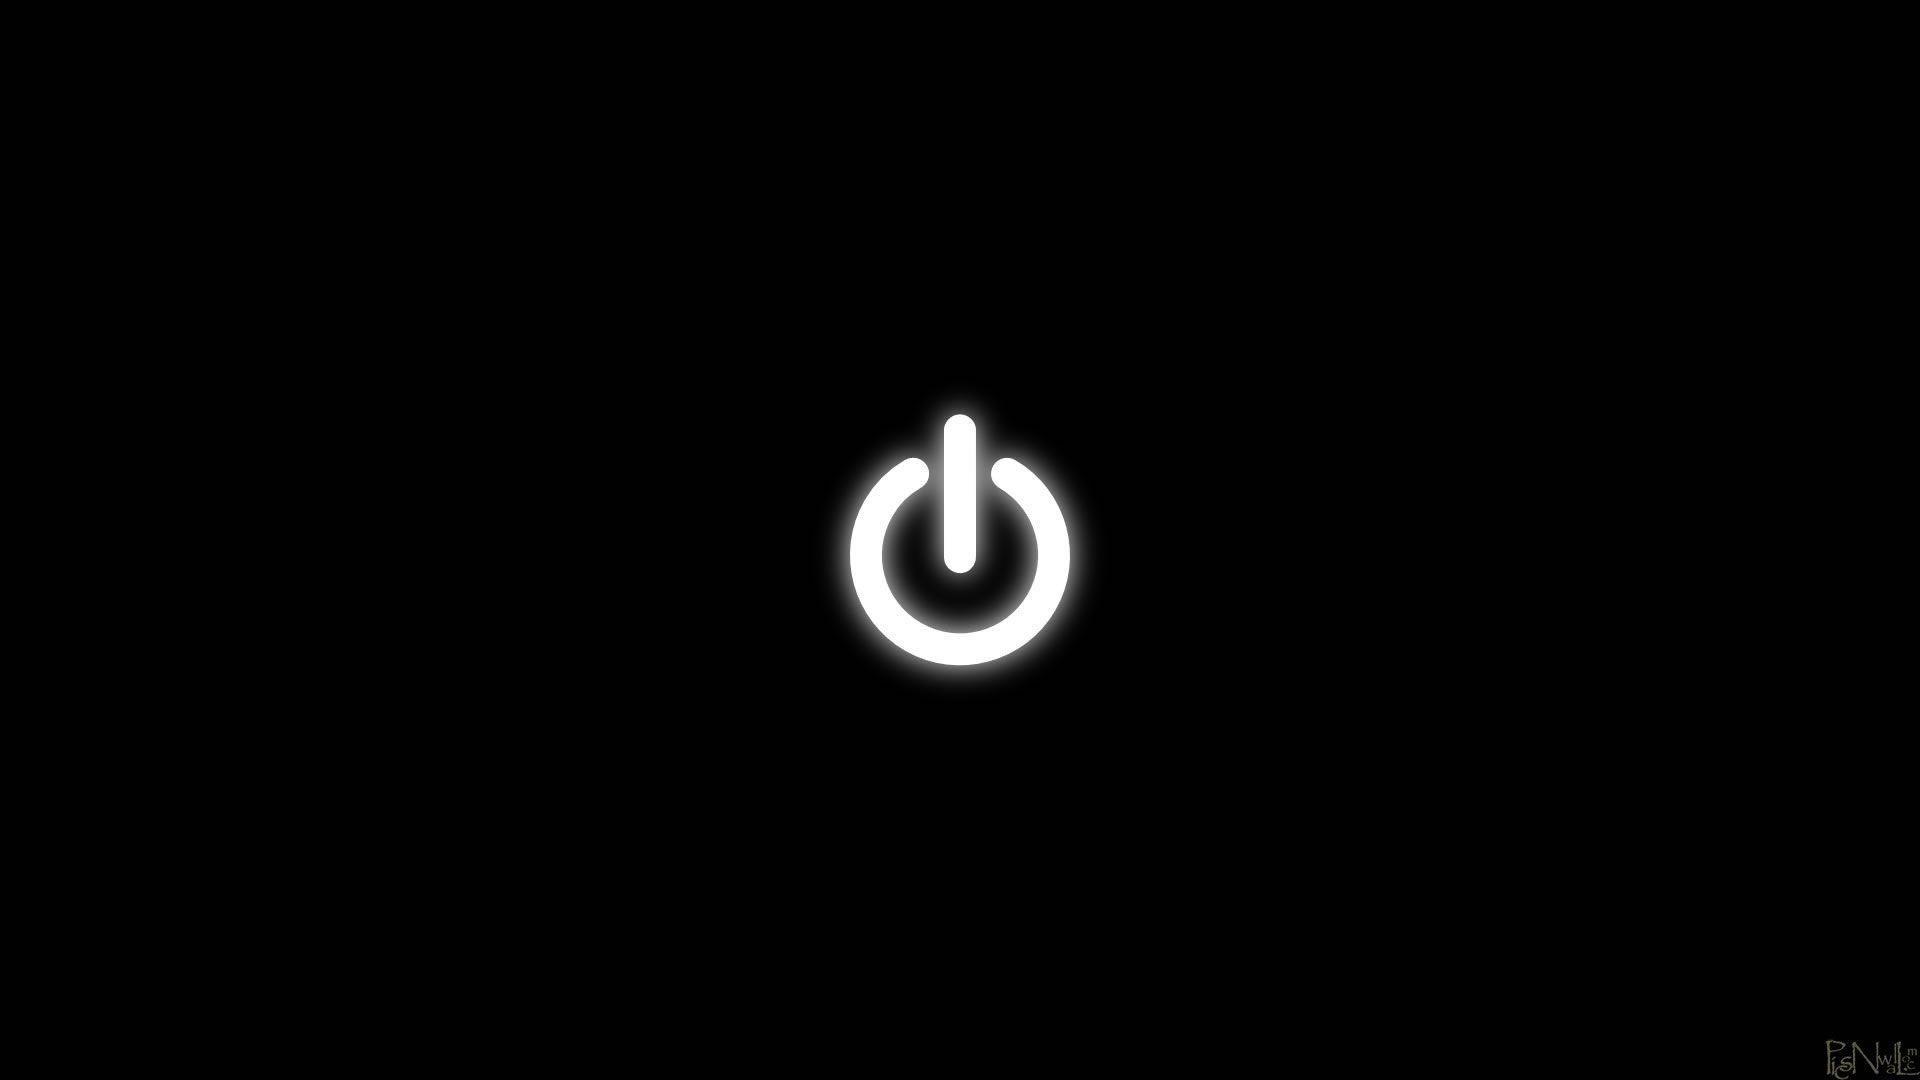 Black and White Power Button Icon, iPhone Wallpaper, Facebook